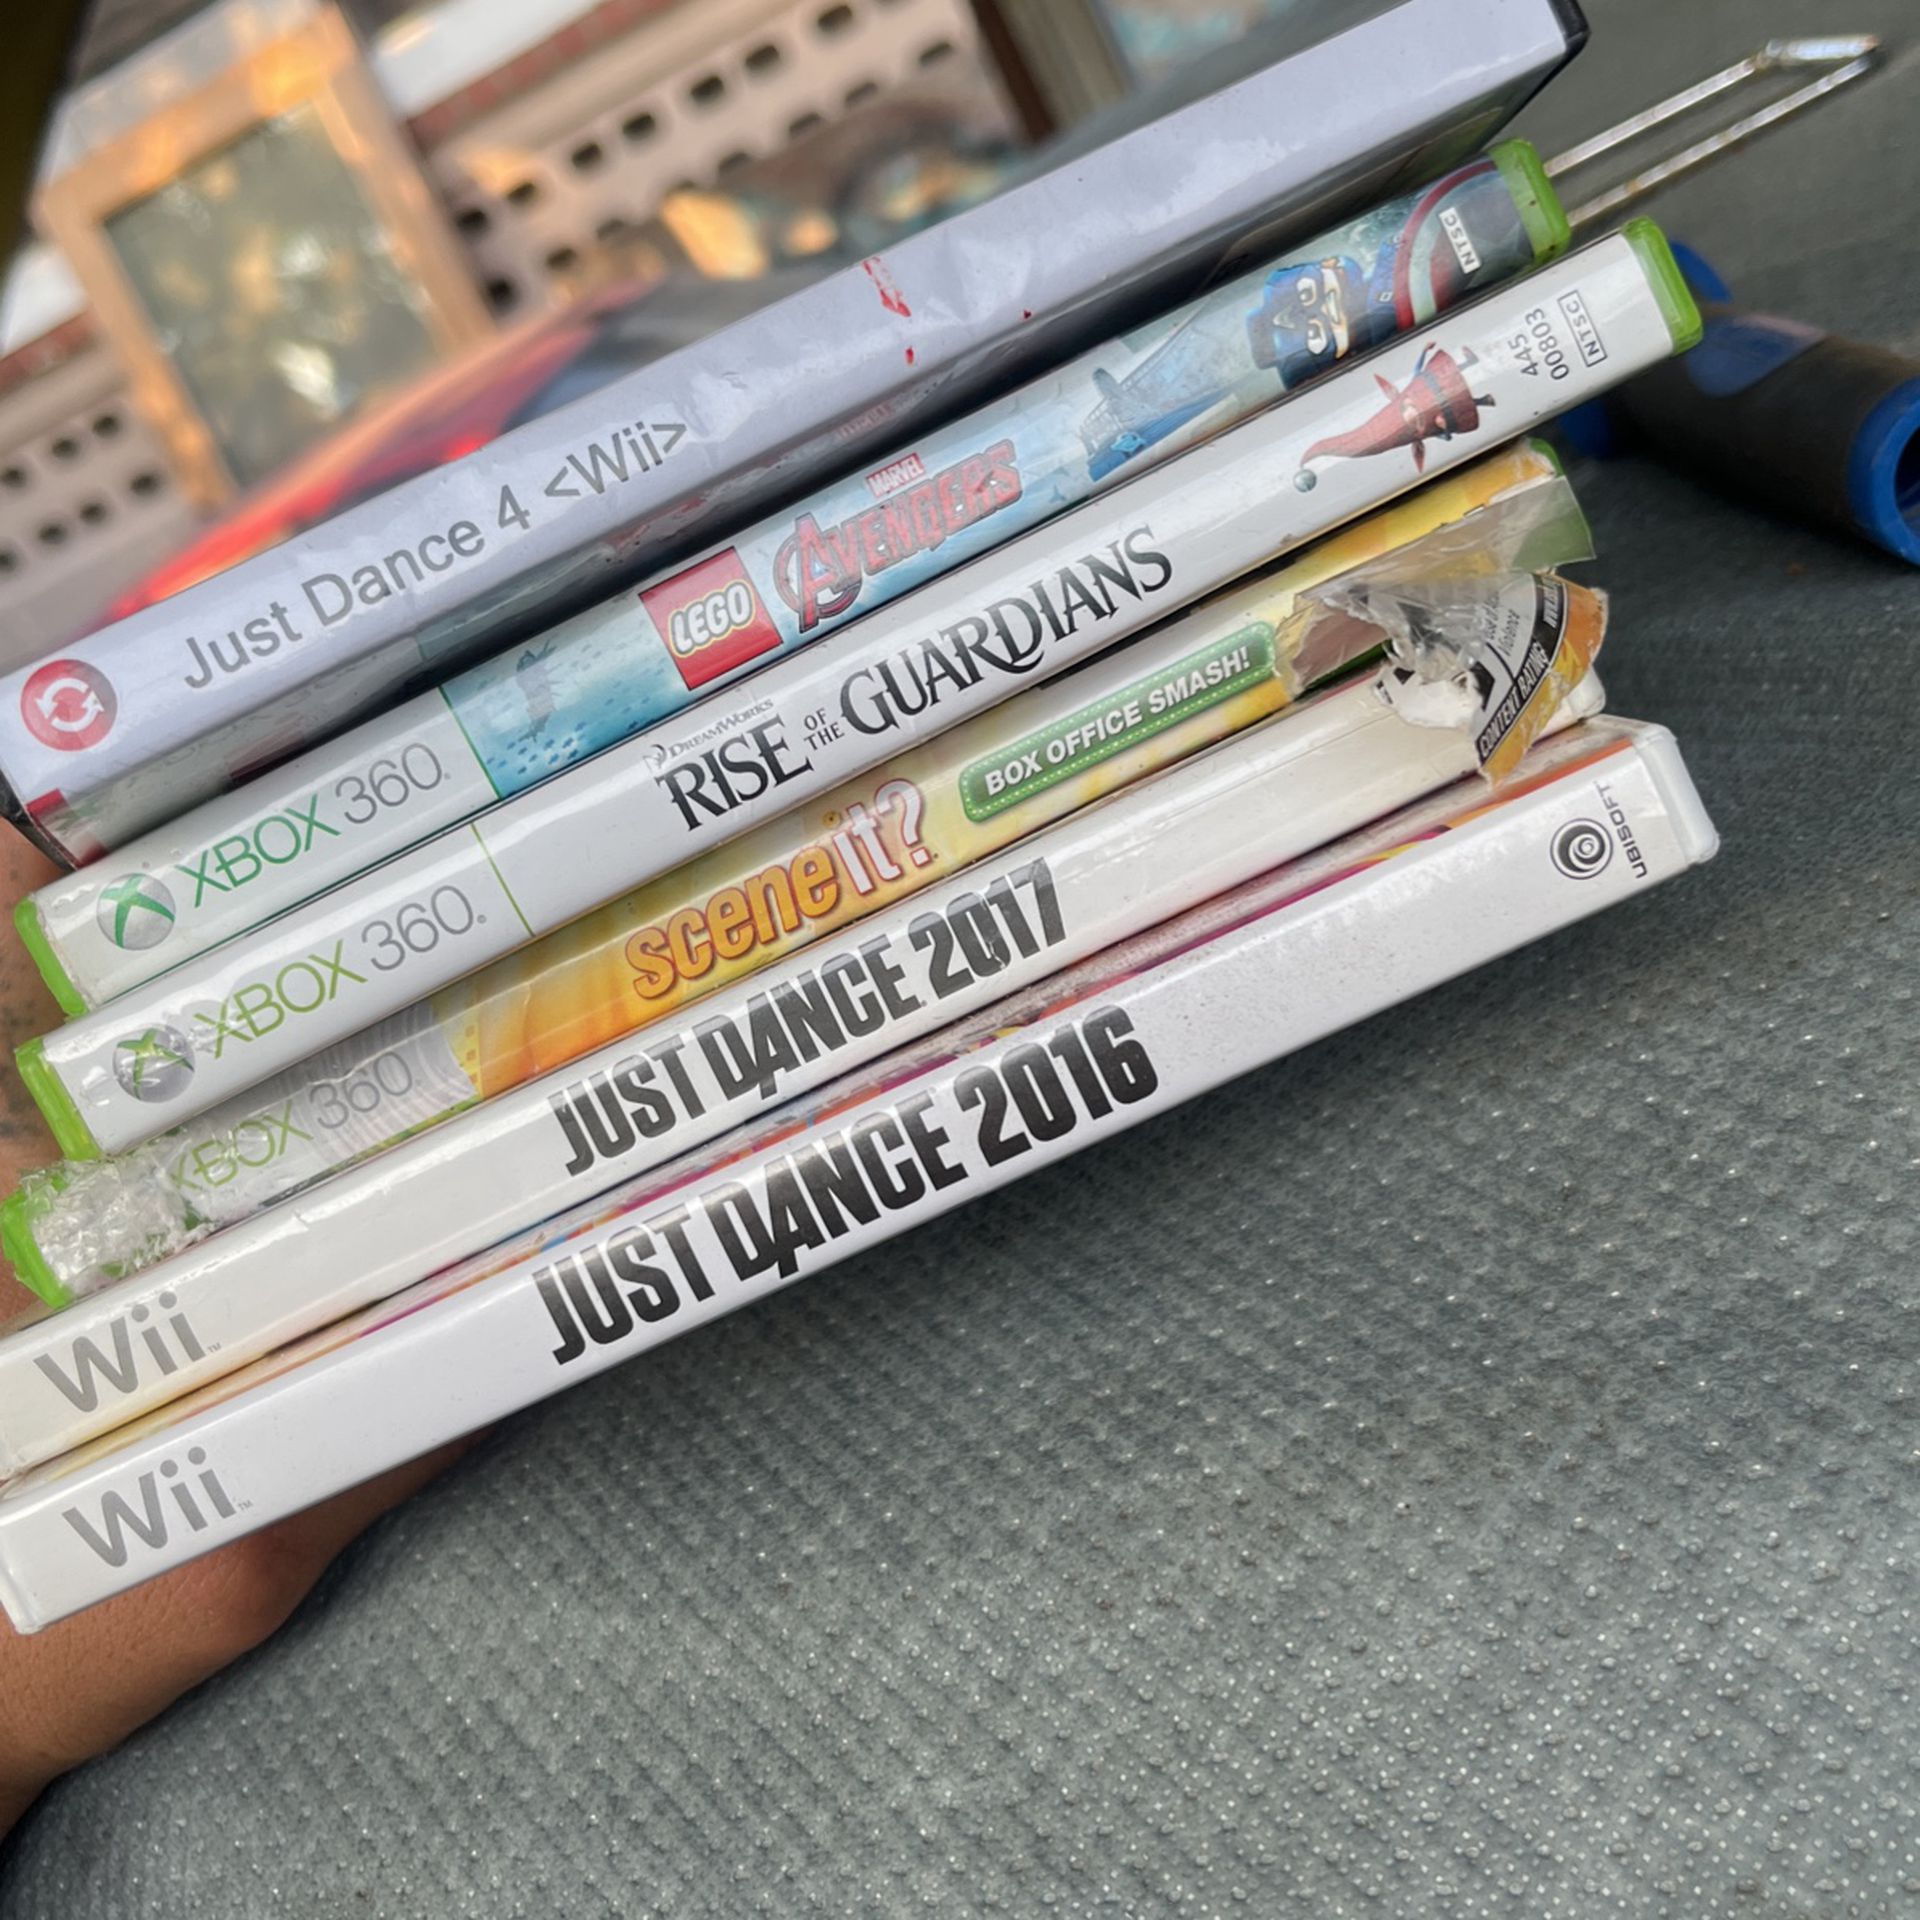 Ps2 Limited. Wii    6 Games Total